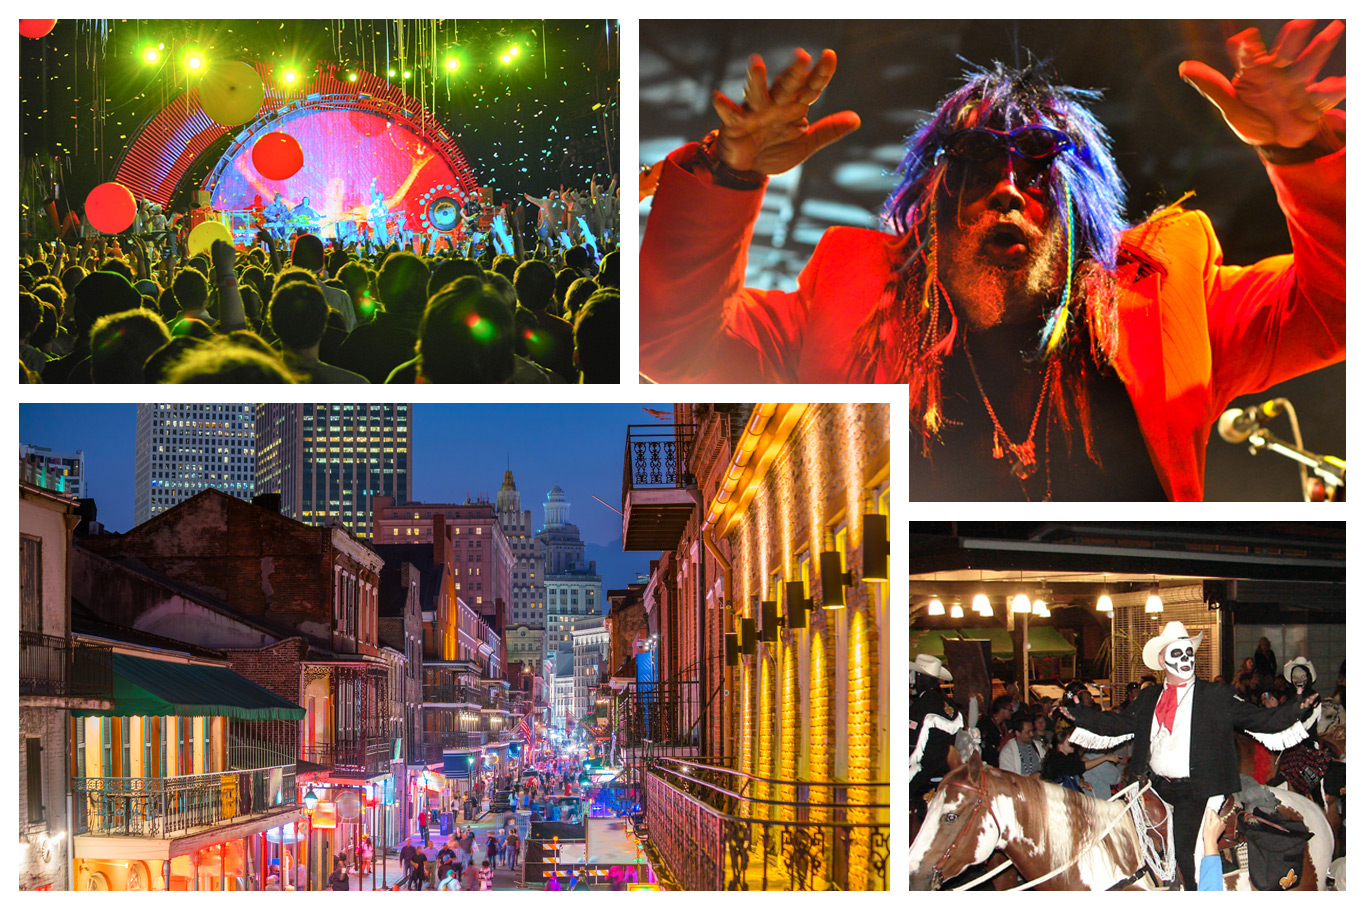 Creepy costumes, Halloween parades, and concerts reveal what makes New Orleans a FOMO place. 